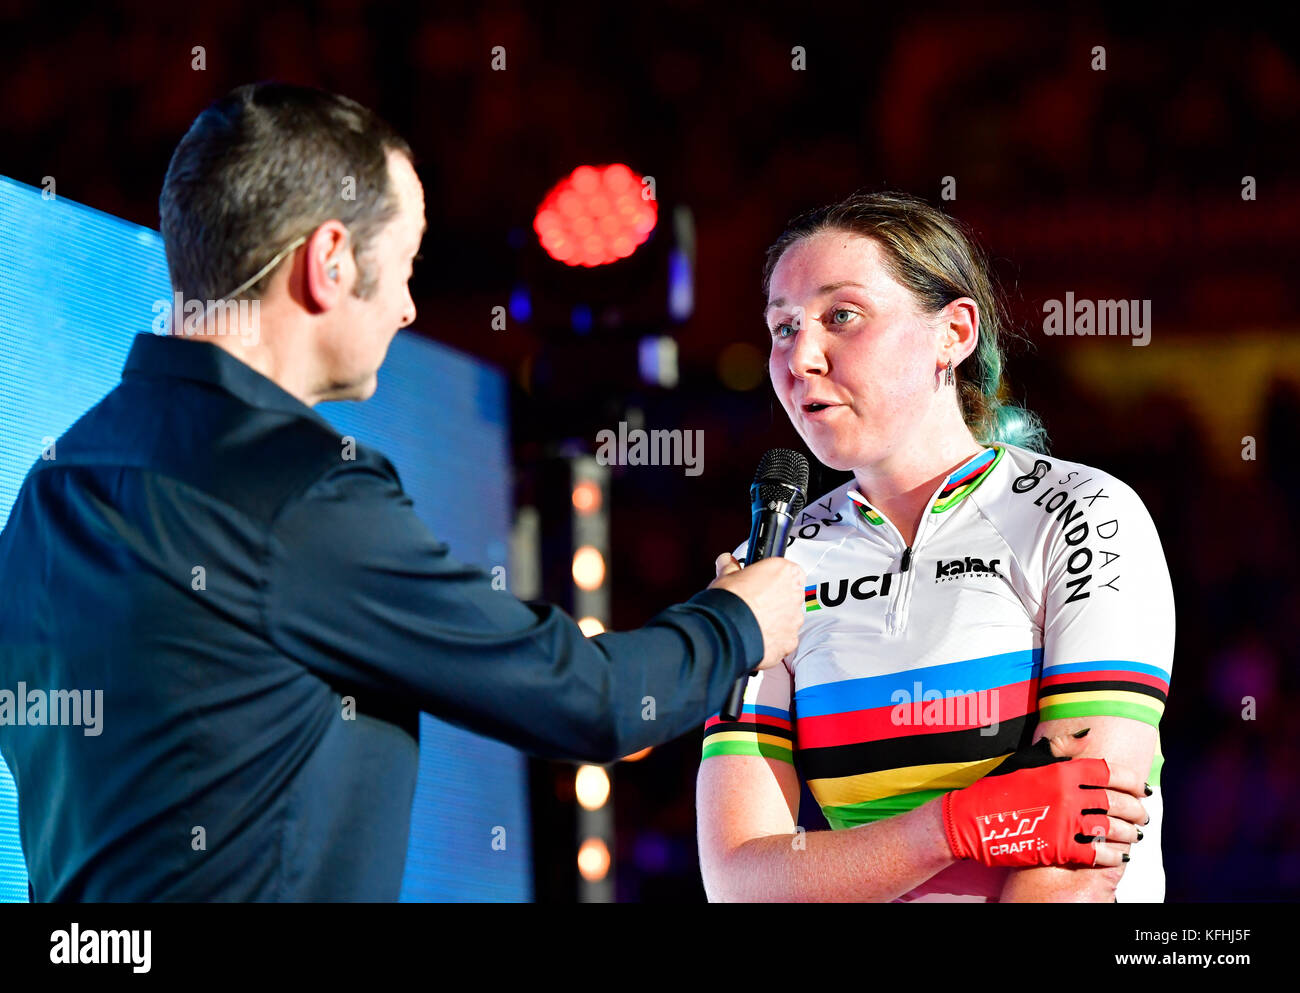 London, UK. 28th Oct, 2017. Rebecca Raybould (GBR) at Presentation after winning Women's Elimination Race (UCI Omnium) during Six Day London - day 5 event on Saturday, 28 October 2017, London England. Credit: Taka Wu/Alamy Live News Stock Photo